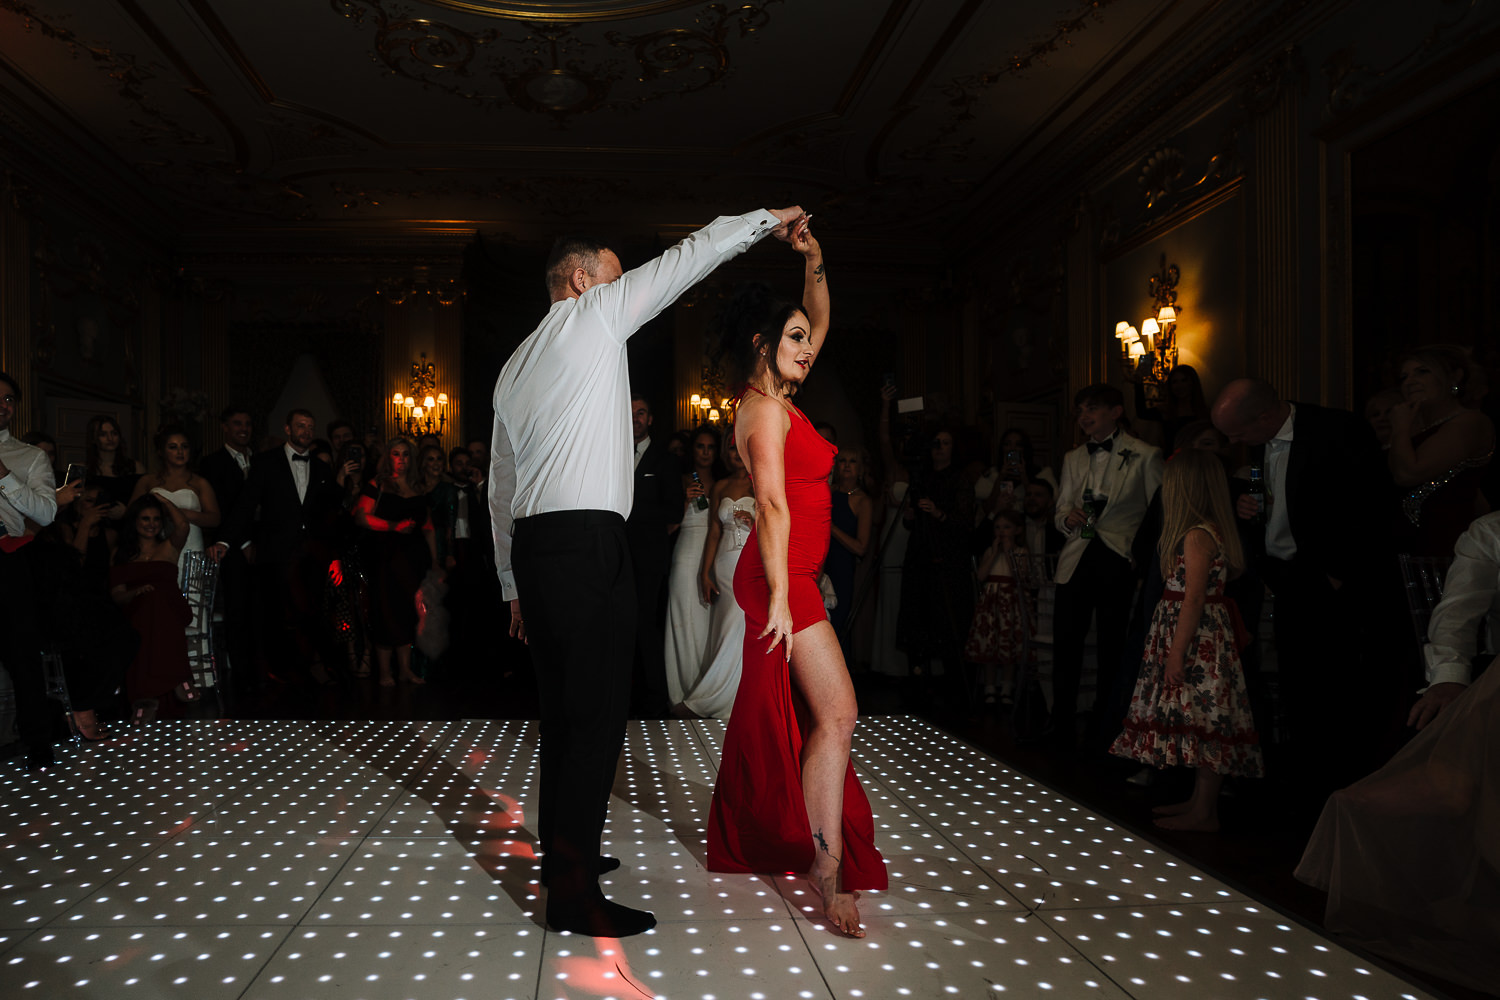 First dance at Knowsley Hall